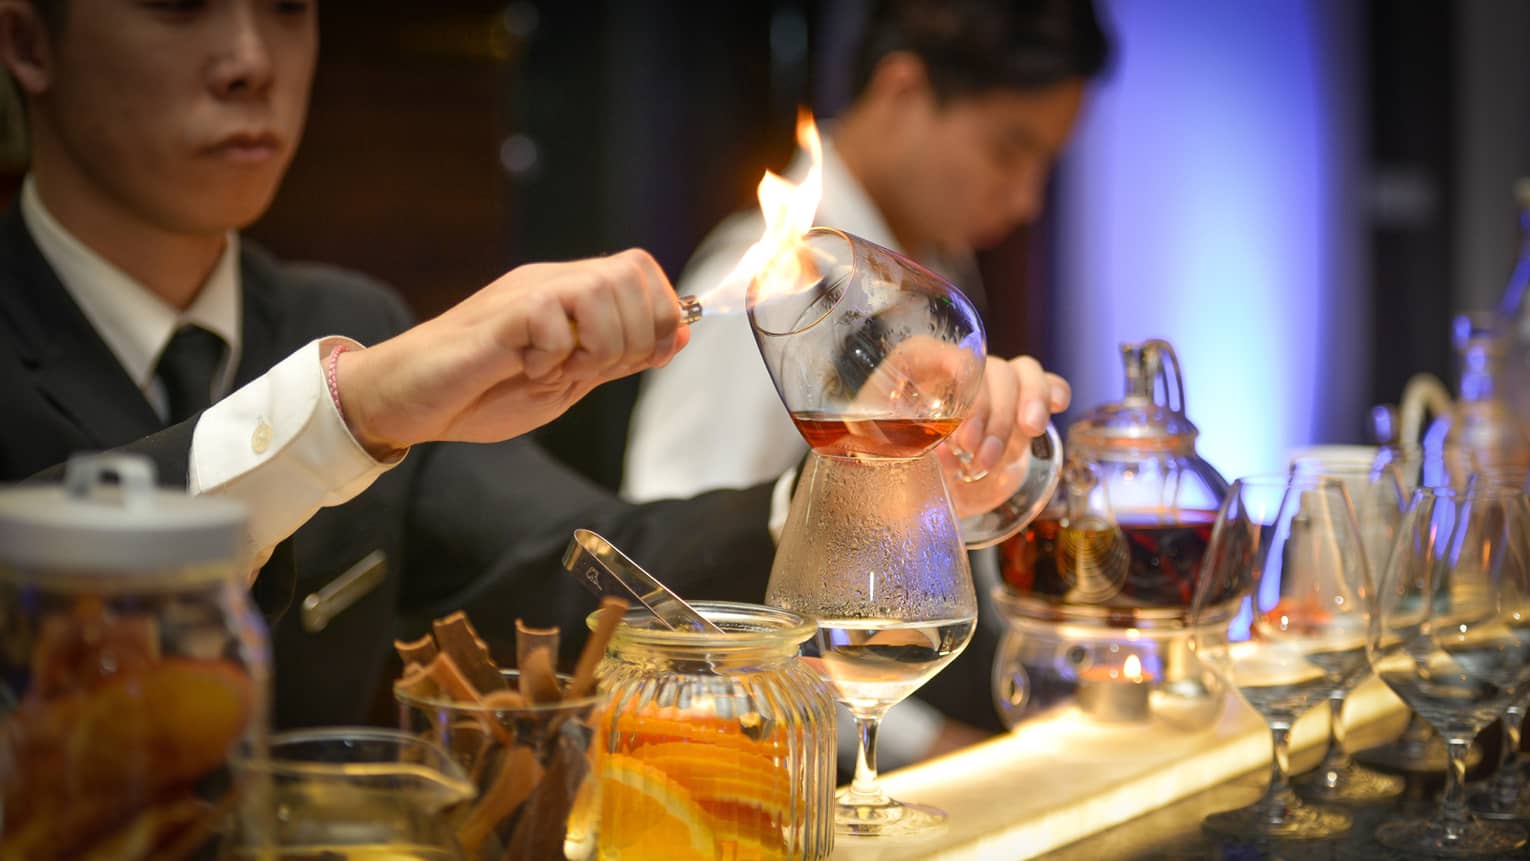 Opus Bar bartender holds flame to glass of liquor, prepares to pour it into cup